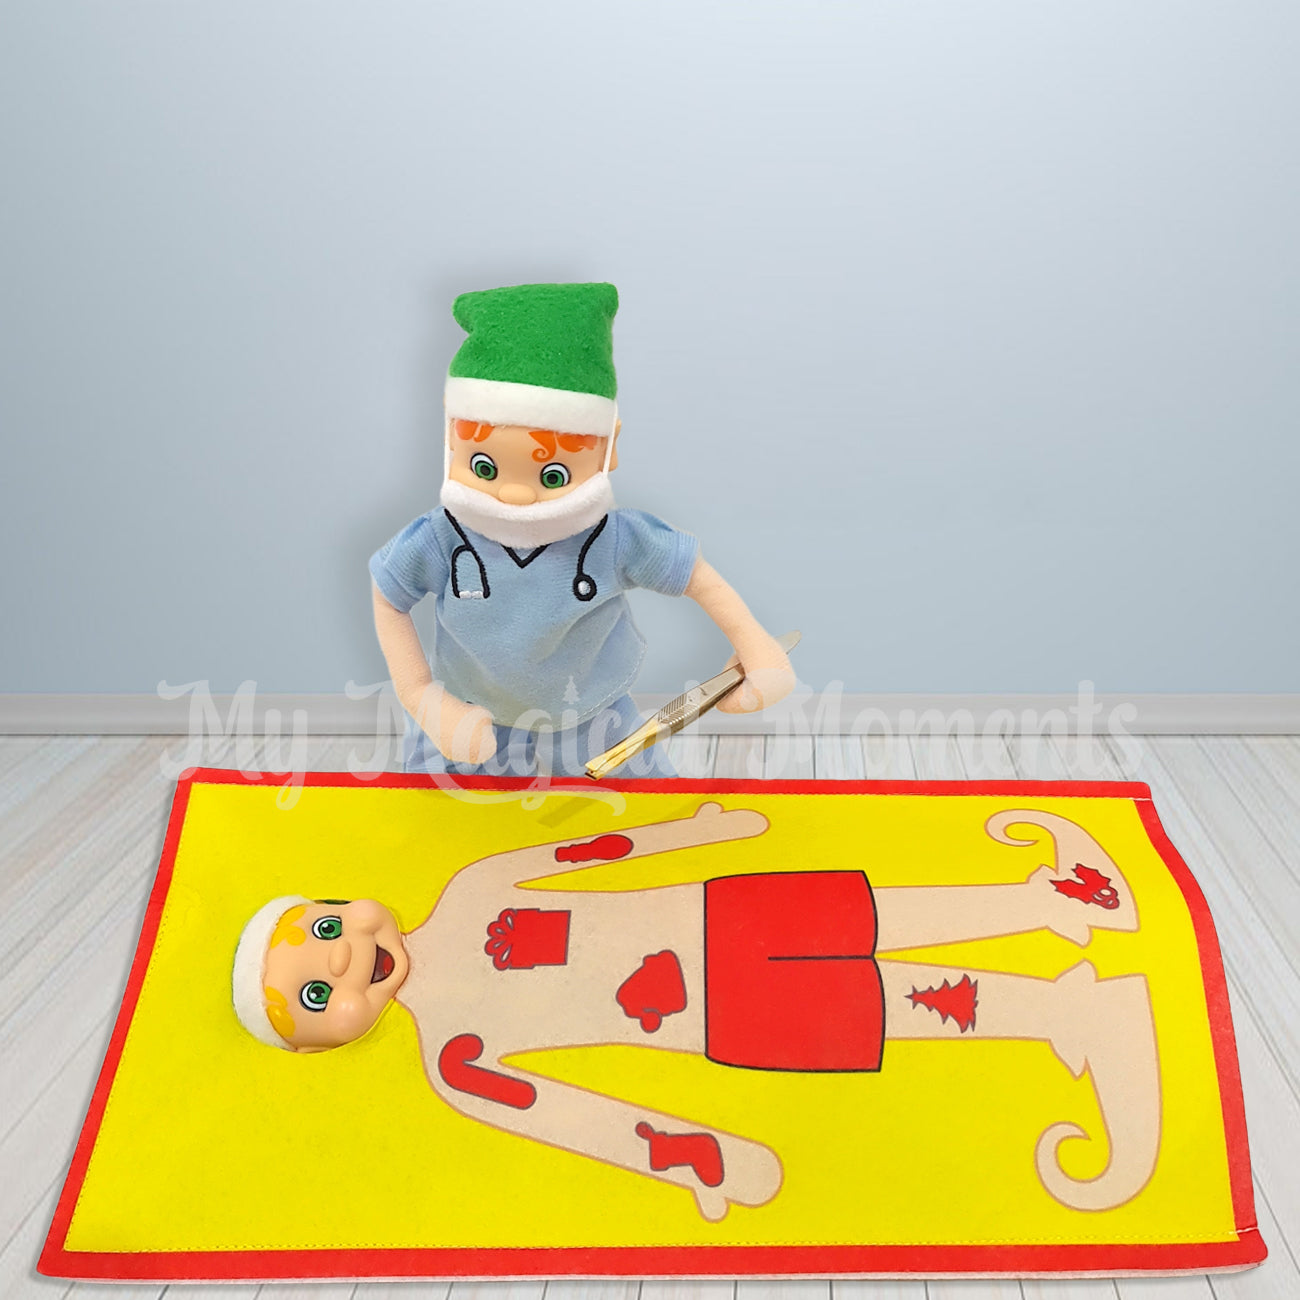 Elf dressed as nurse holding tweezers going to operate on an elf dressed in an operation game costume